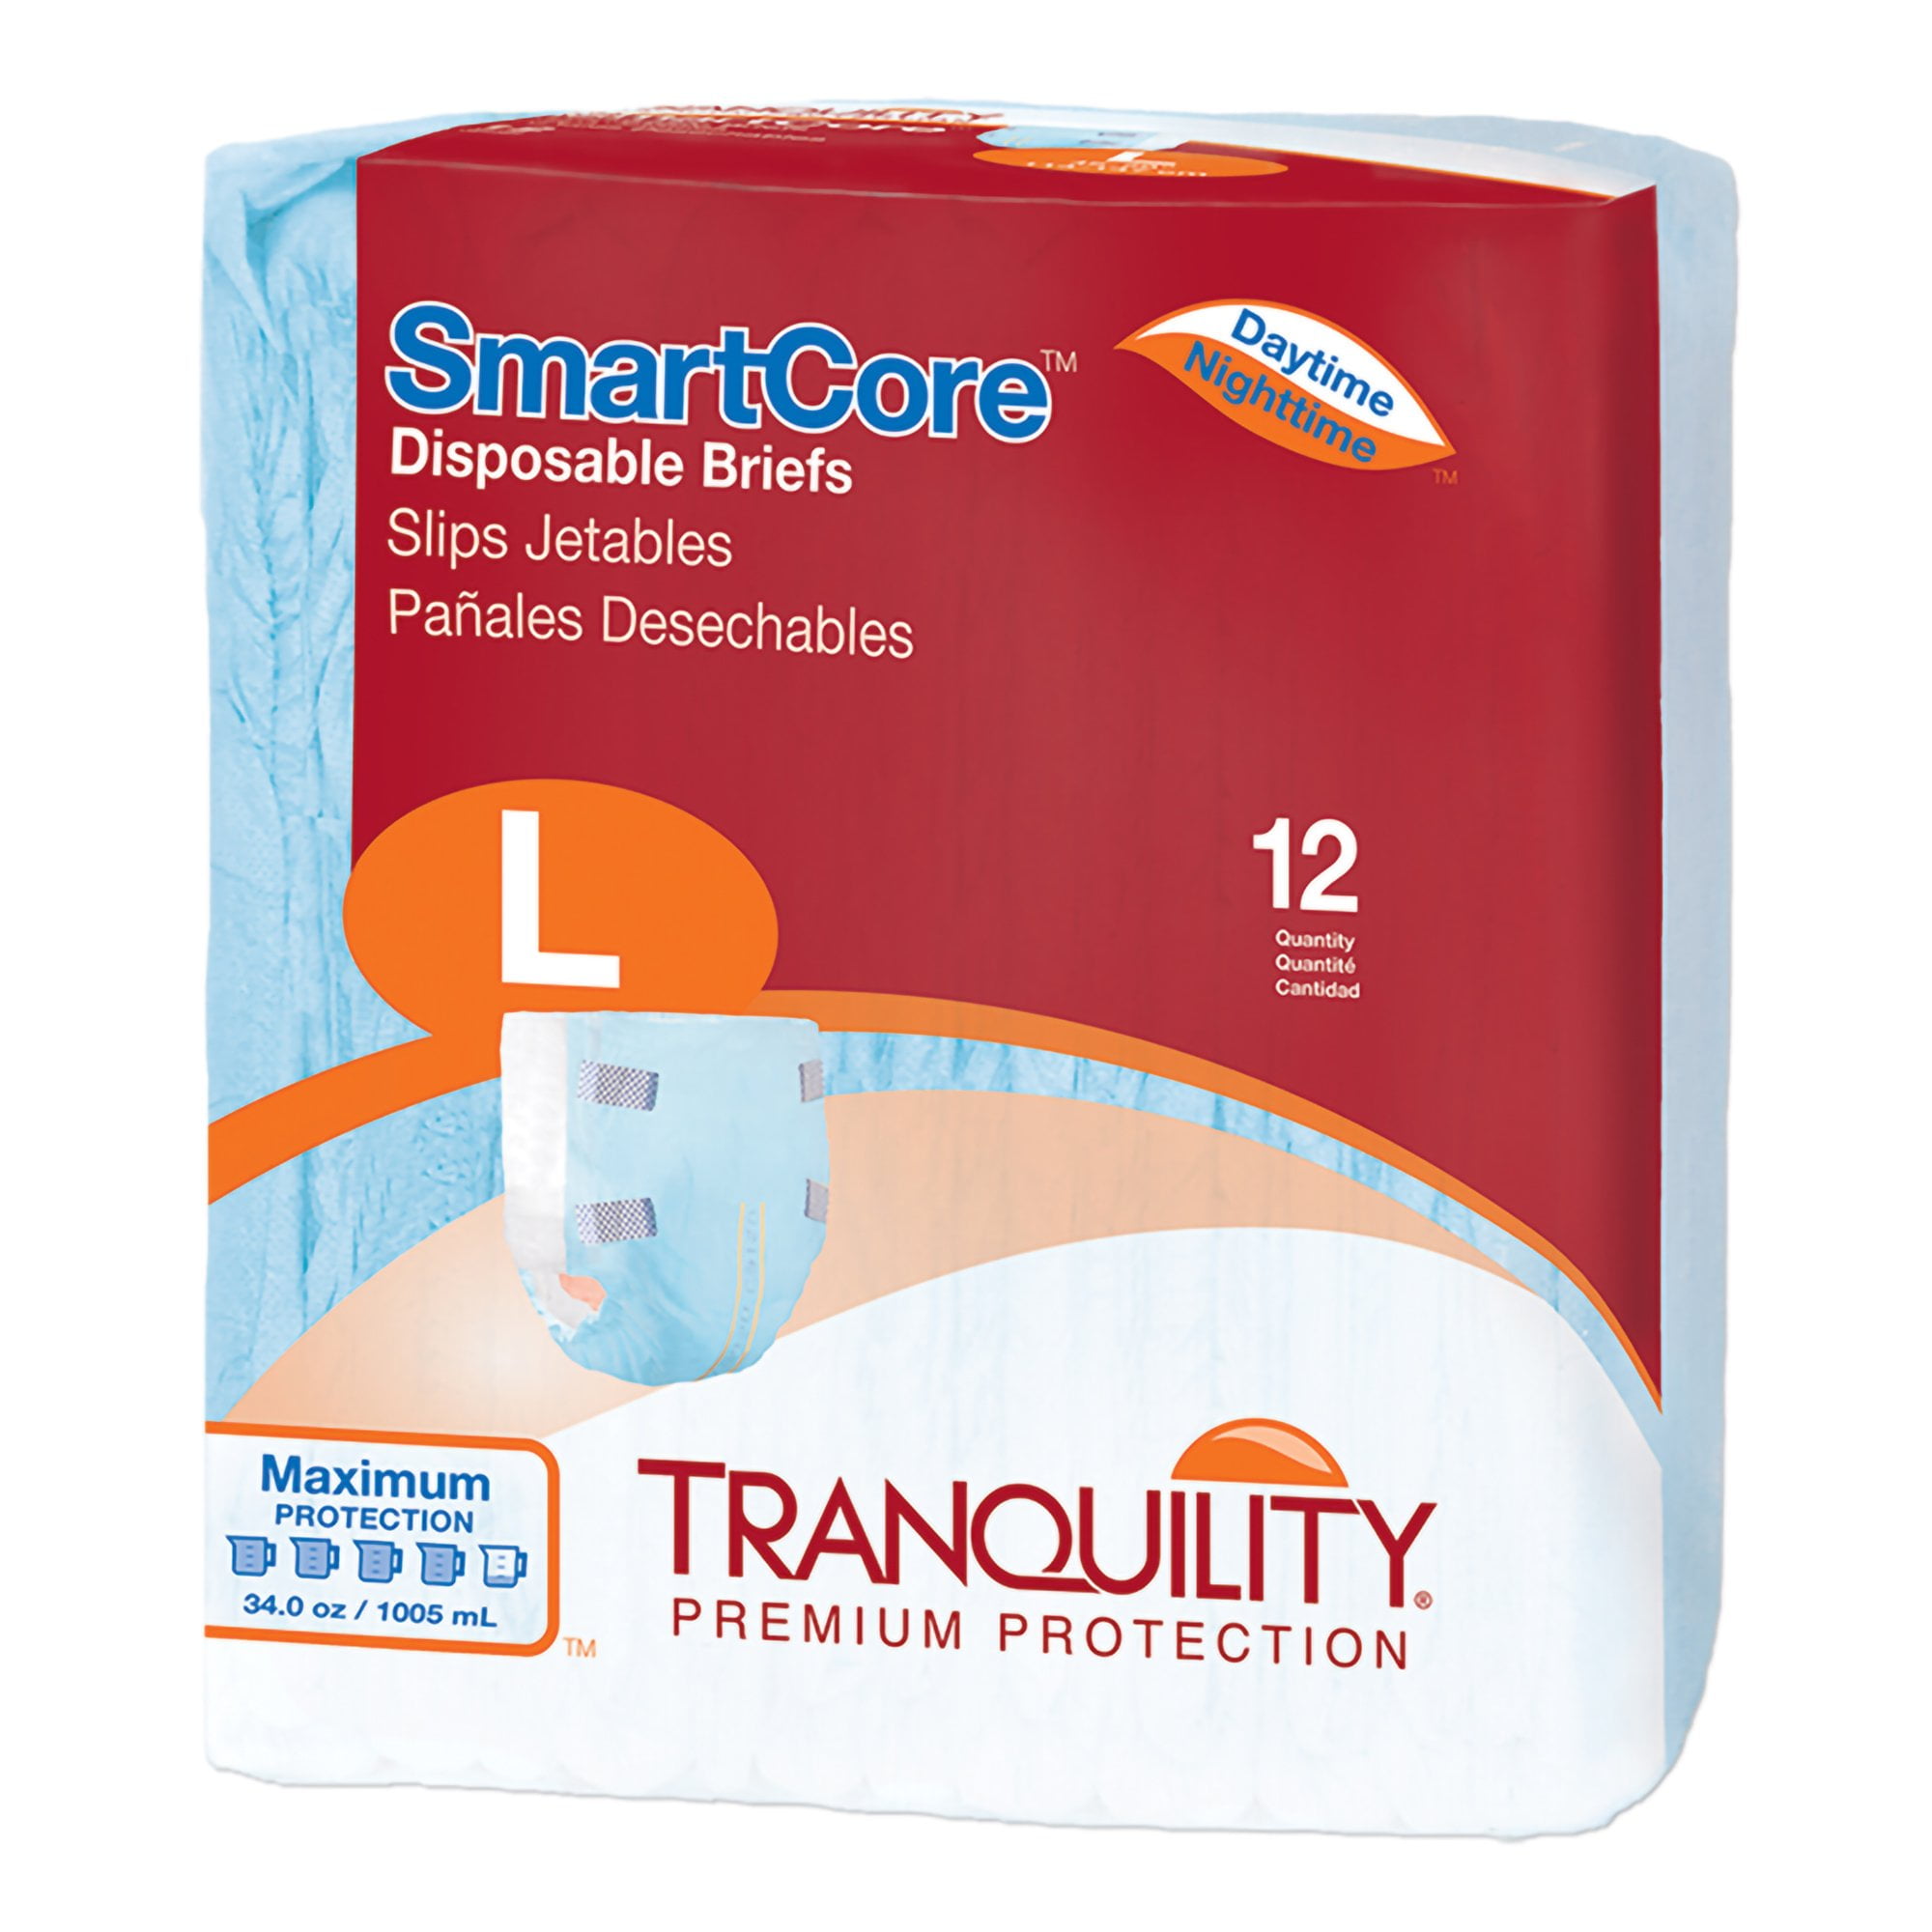 Tranquility Essential Incontinence Booster Pads, Moderate Absorbency -  Unisex, Regular, 12 in L